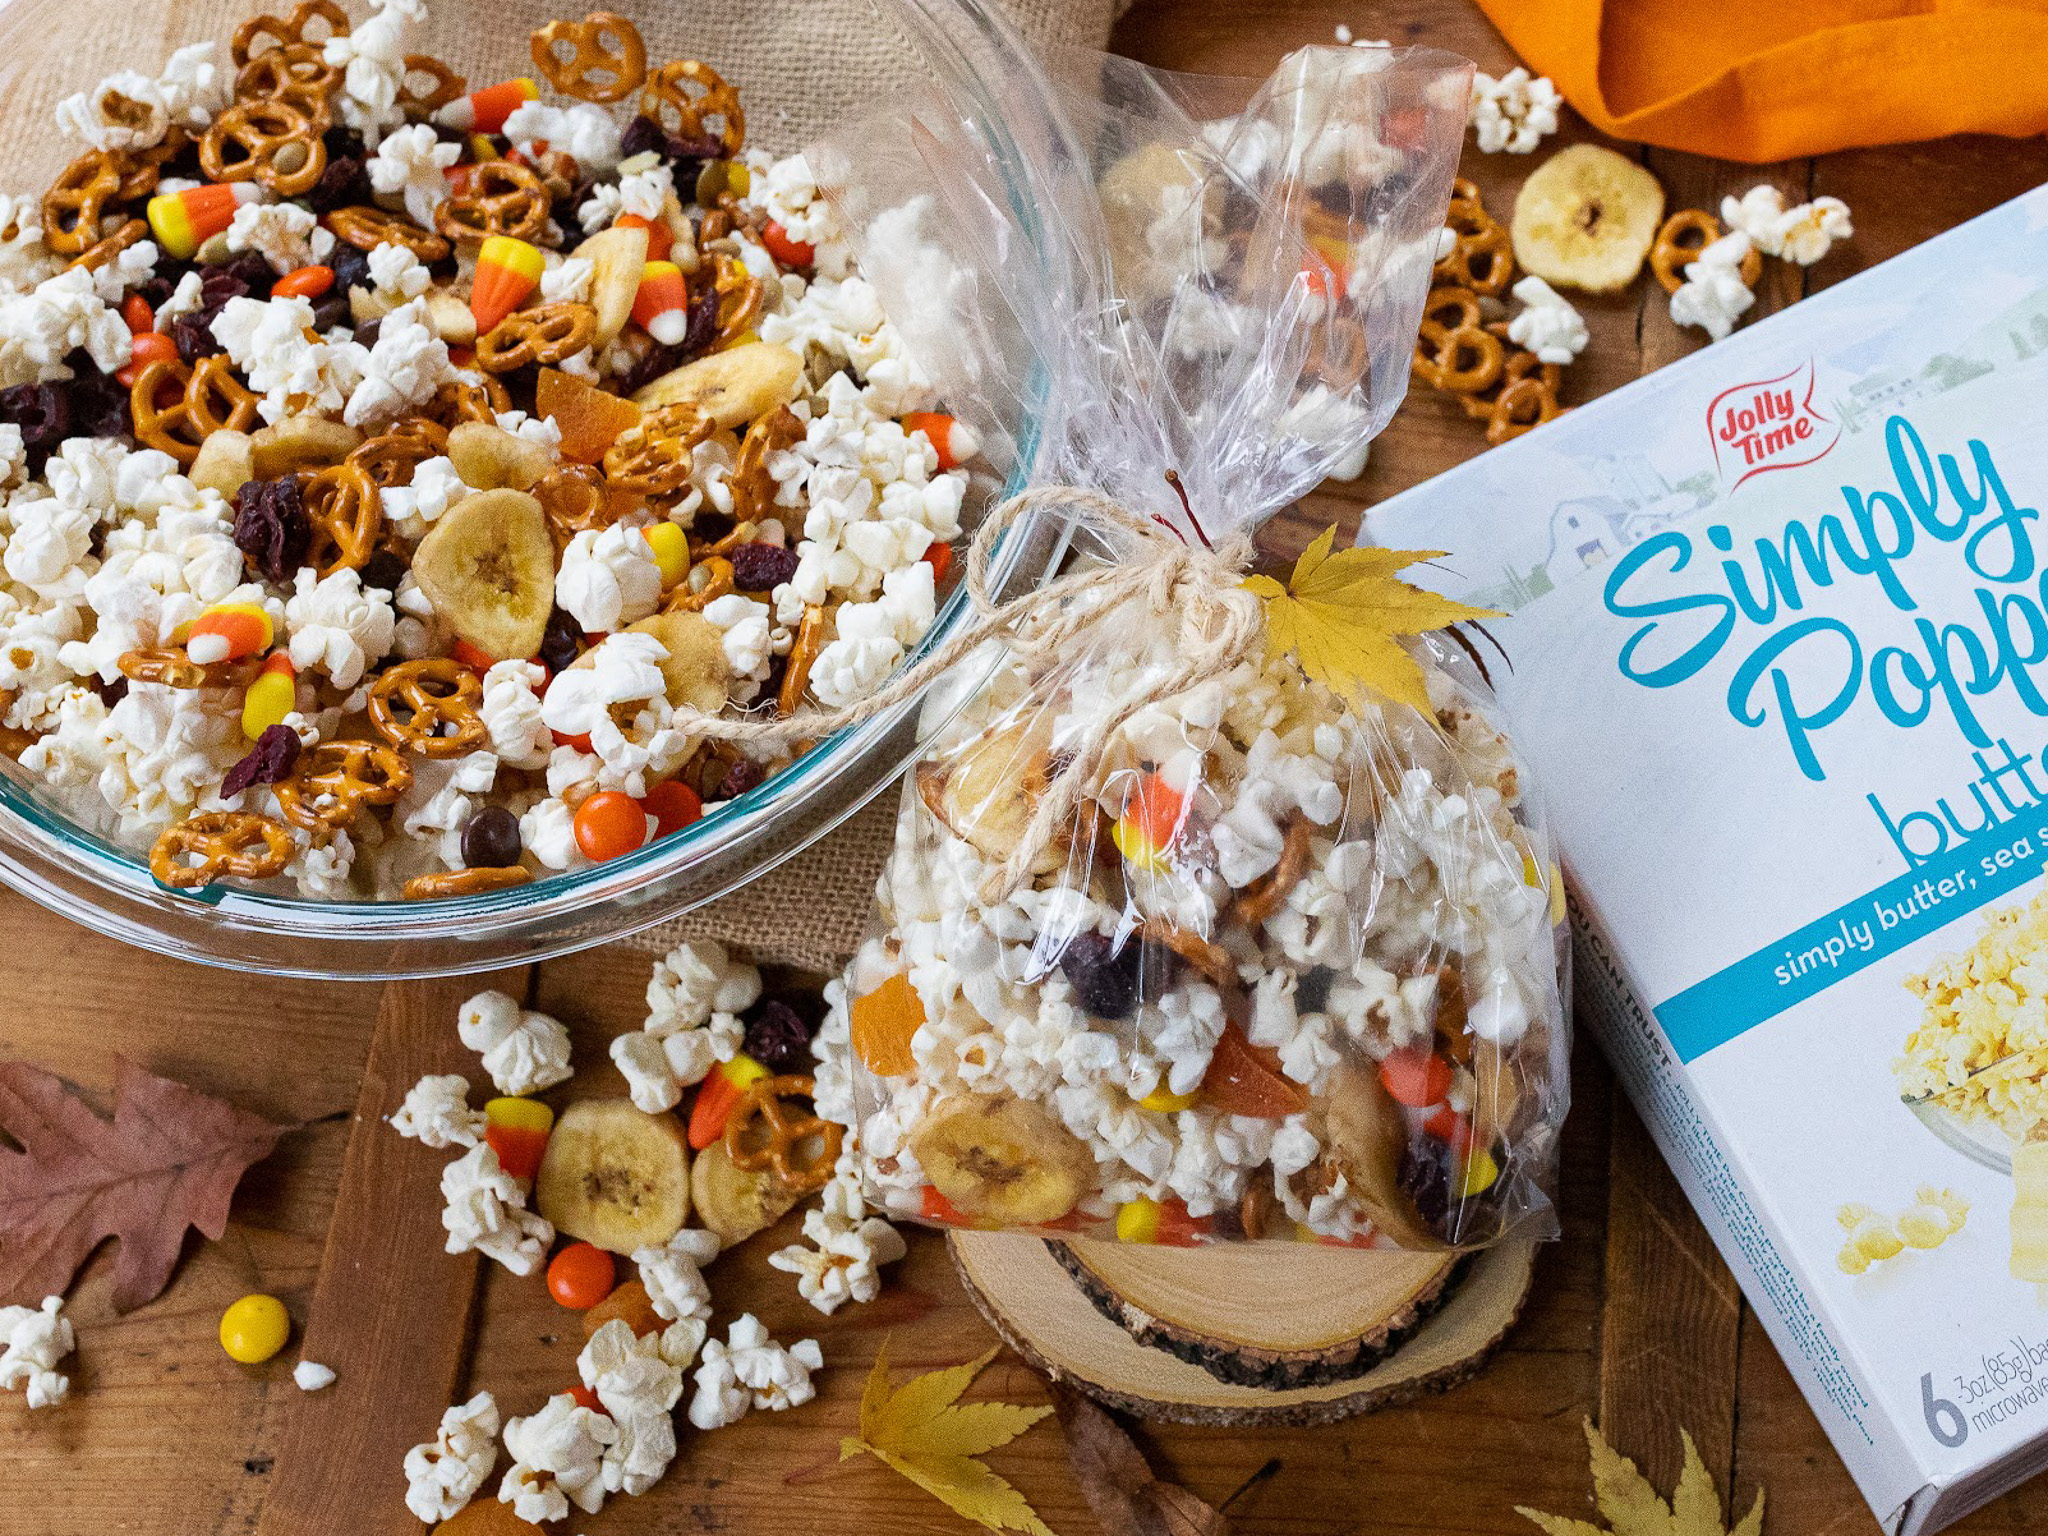 Harvest Popcorn Trail Mix With JOLLY TIME Pop Corn Is Perfect For All Your Fall Activities